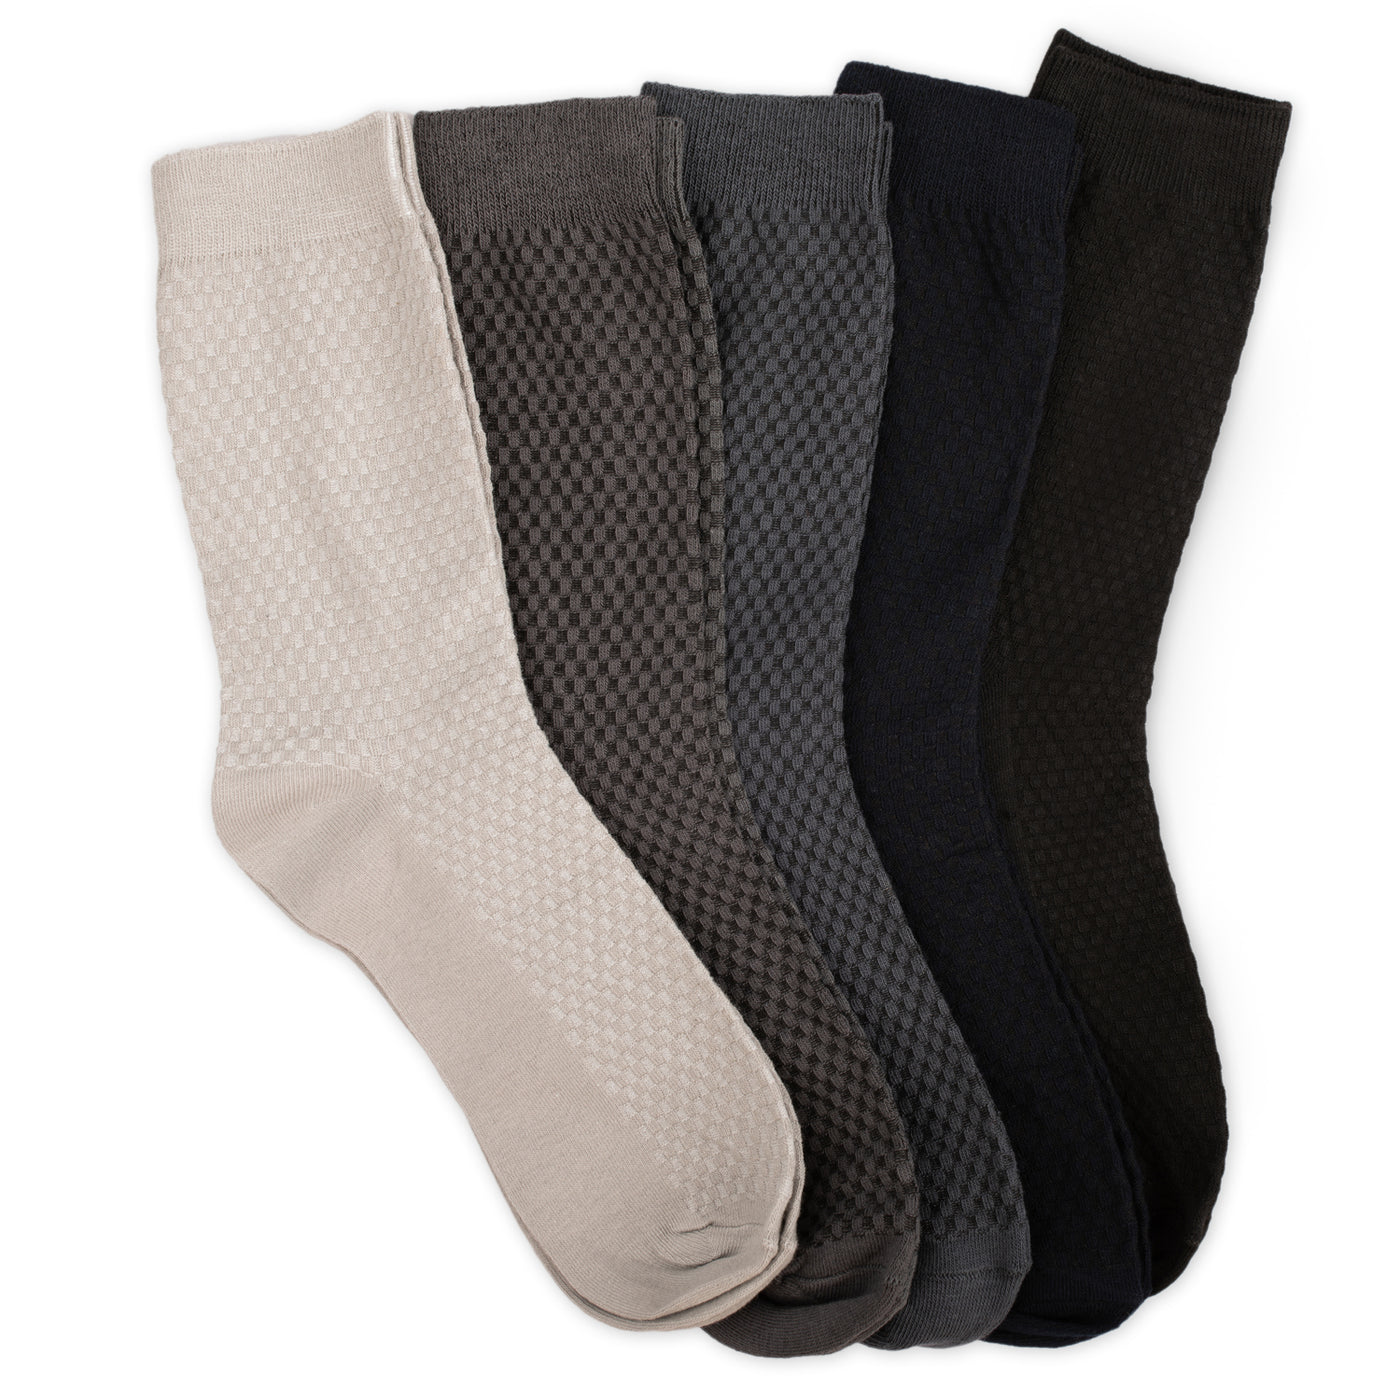 High Quality Bamboo Fibre Business Socks - Pack of 5 pairs